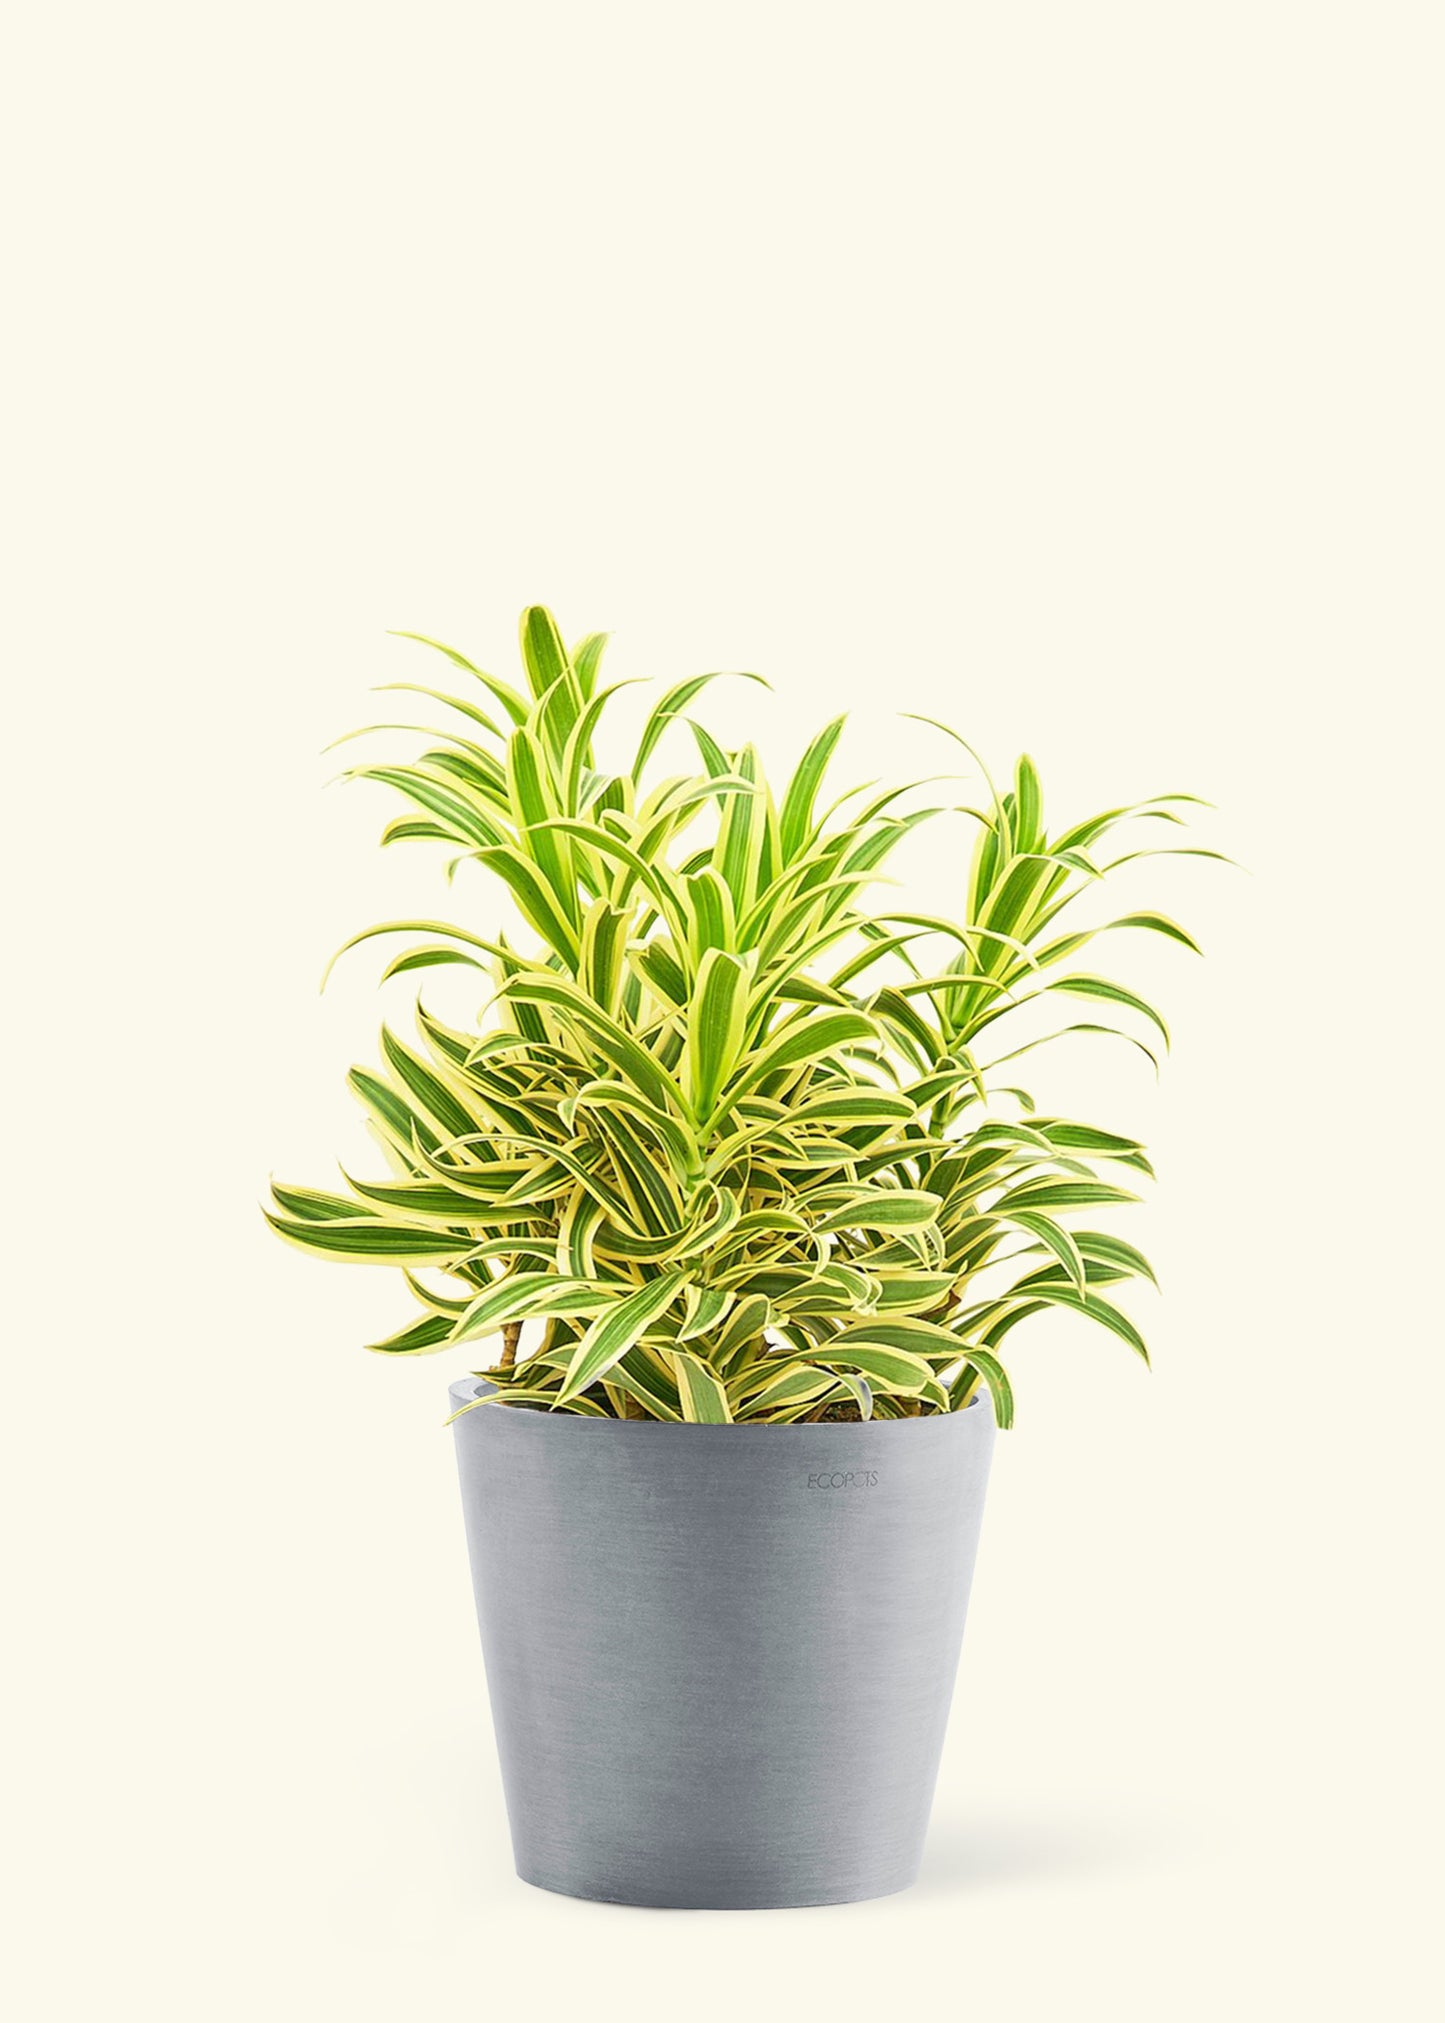 Large Dracaena 'Song of India' Plant in a gray stone pot.